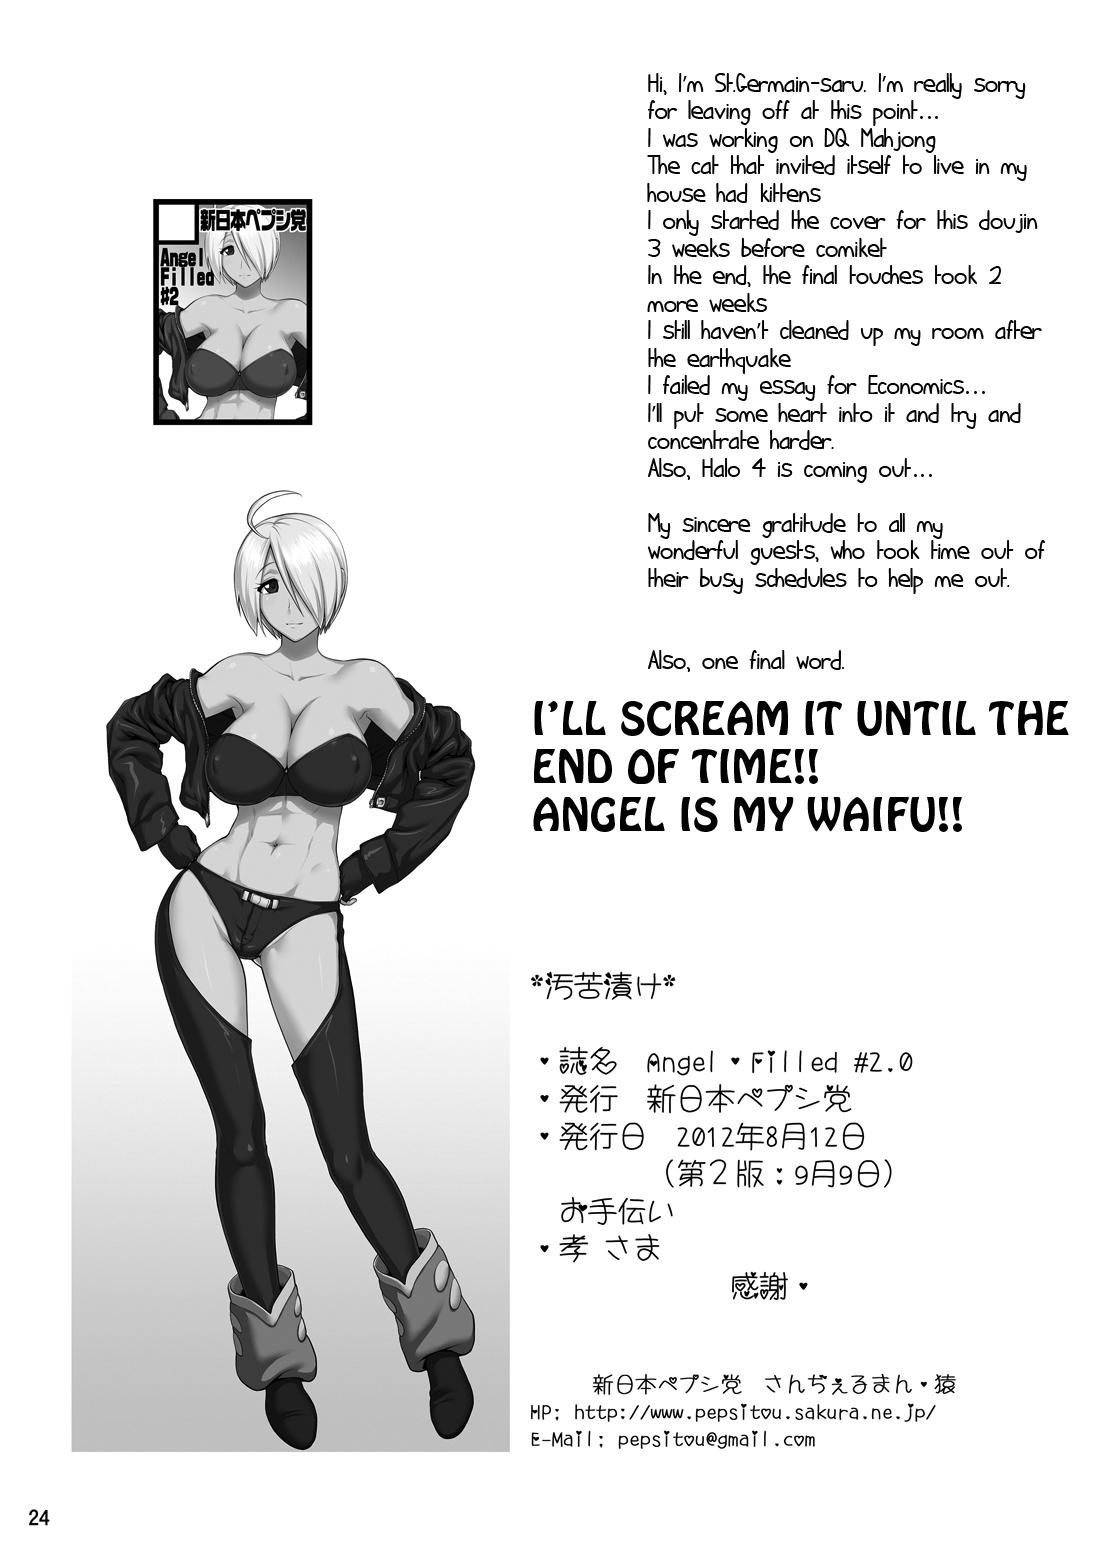 Small Tits Angel Filled #2.0 - King of fighters Assfuck - Page 25